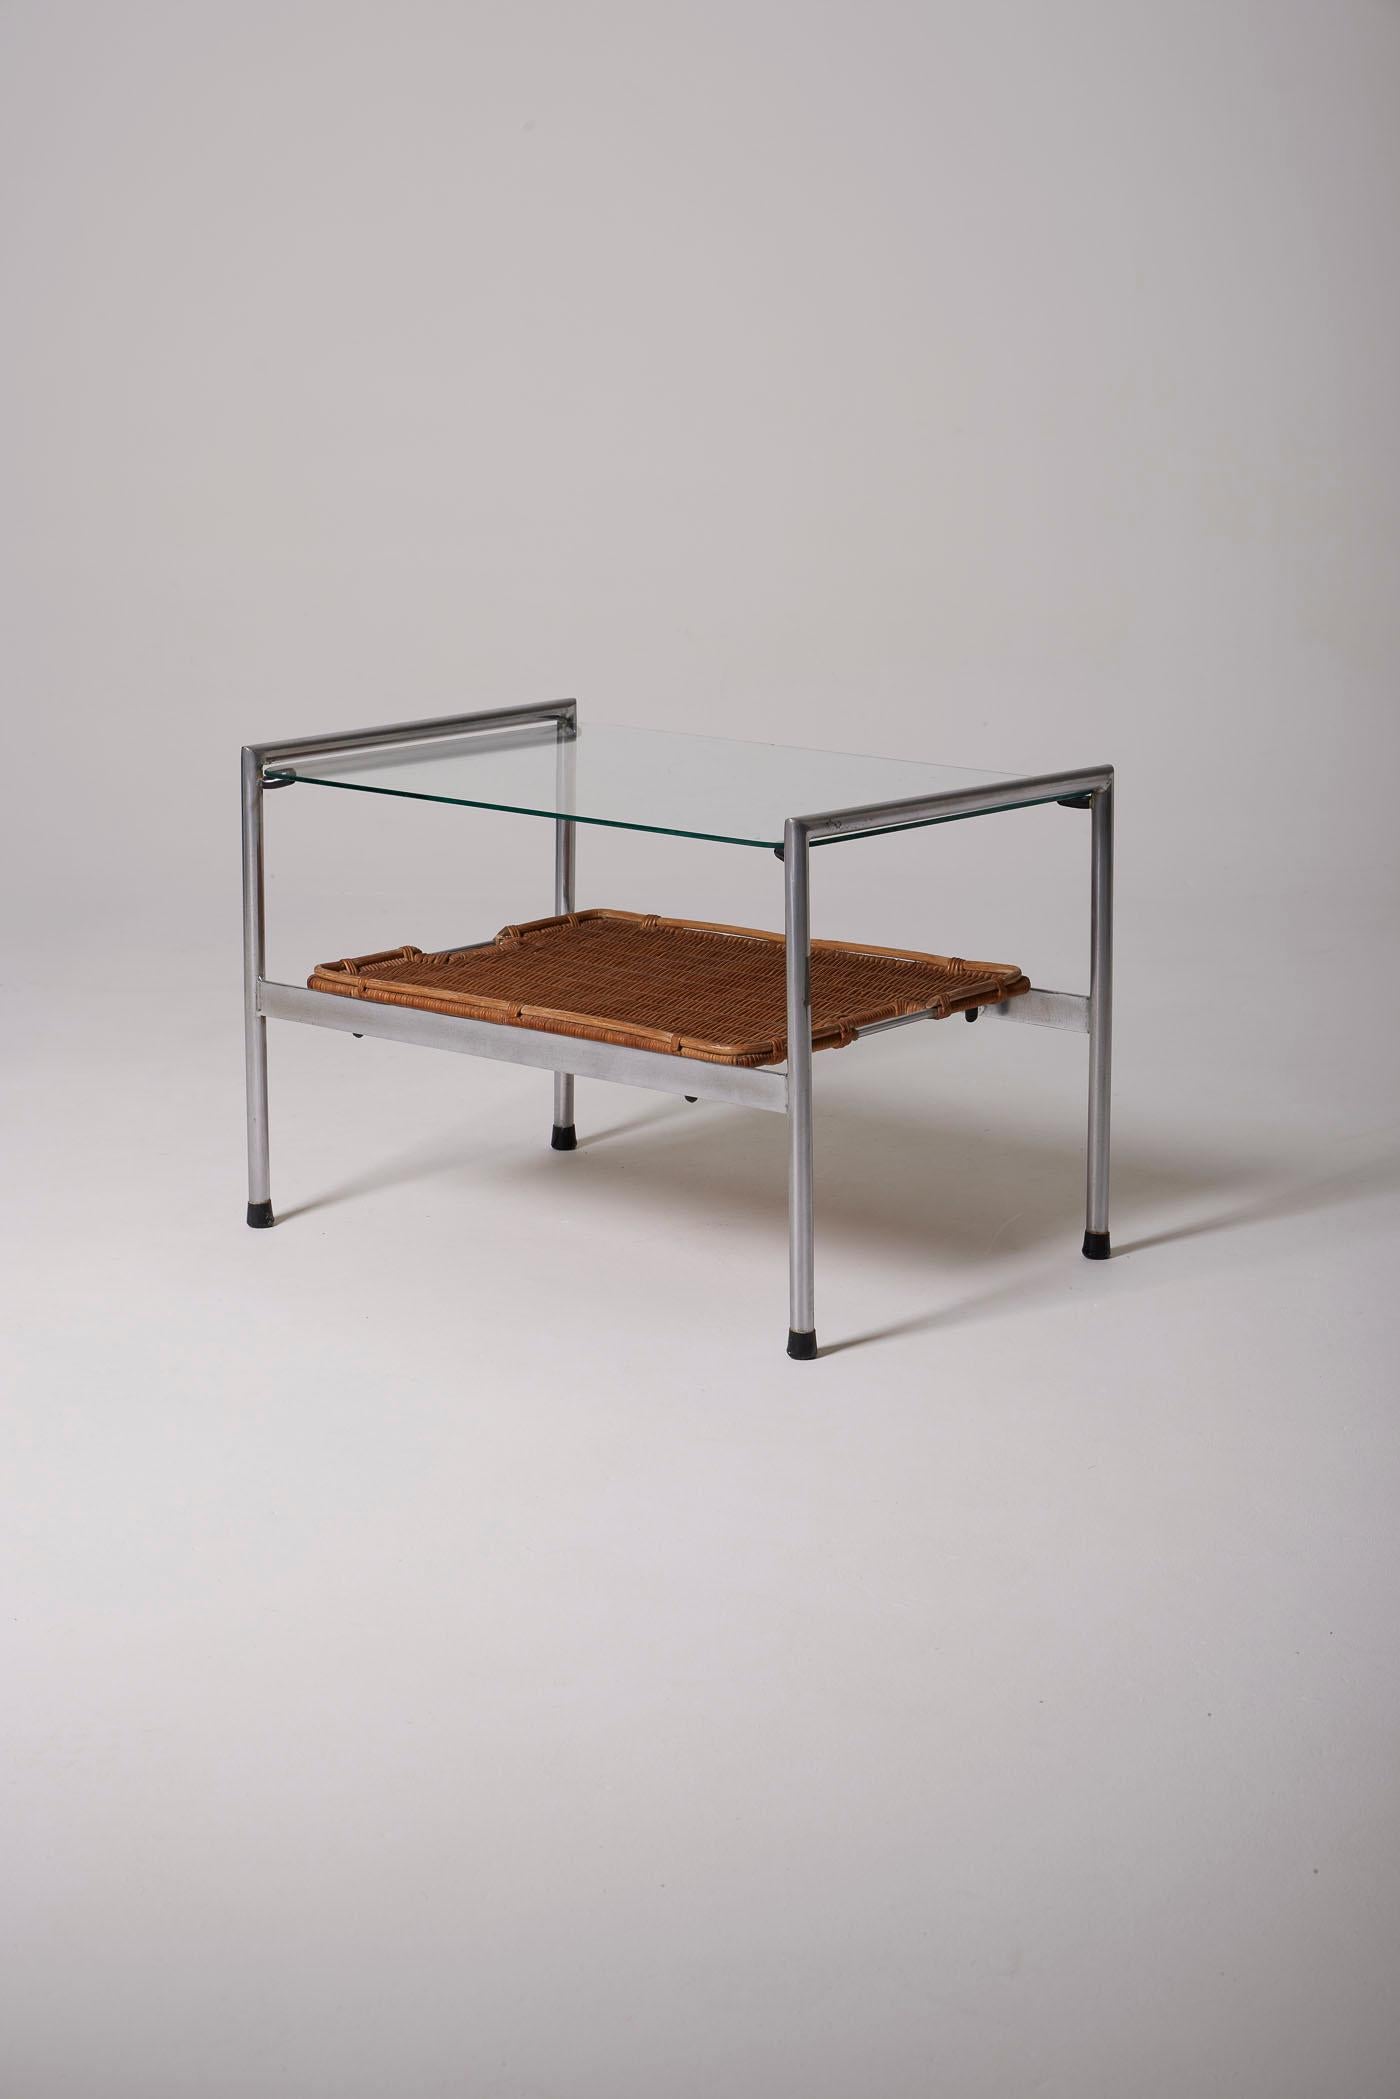 Coffee table or side table by Dutch designer Dirk Van Sliedregt, from the 1950s. It consists of a glass tabletop, a removable woven rattan tray, and a brushed steel base. In very good condition.
DV428